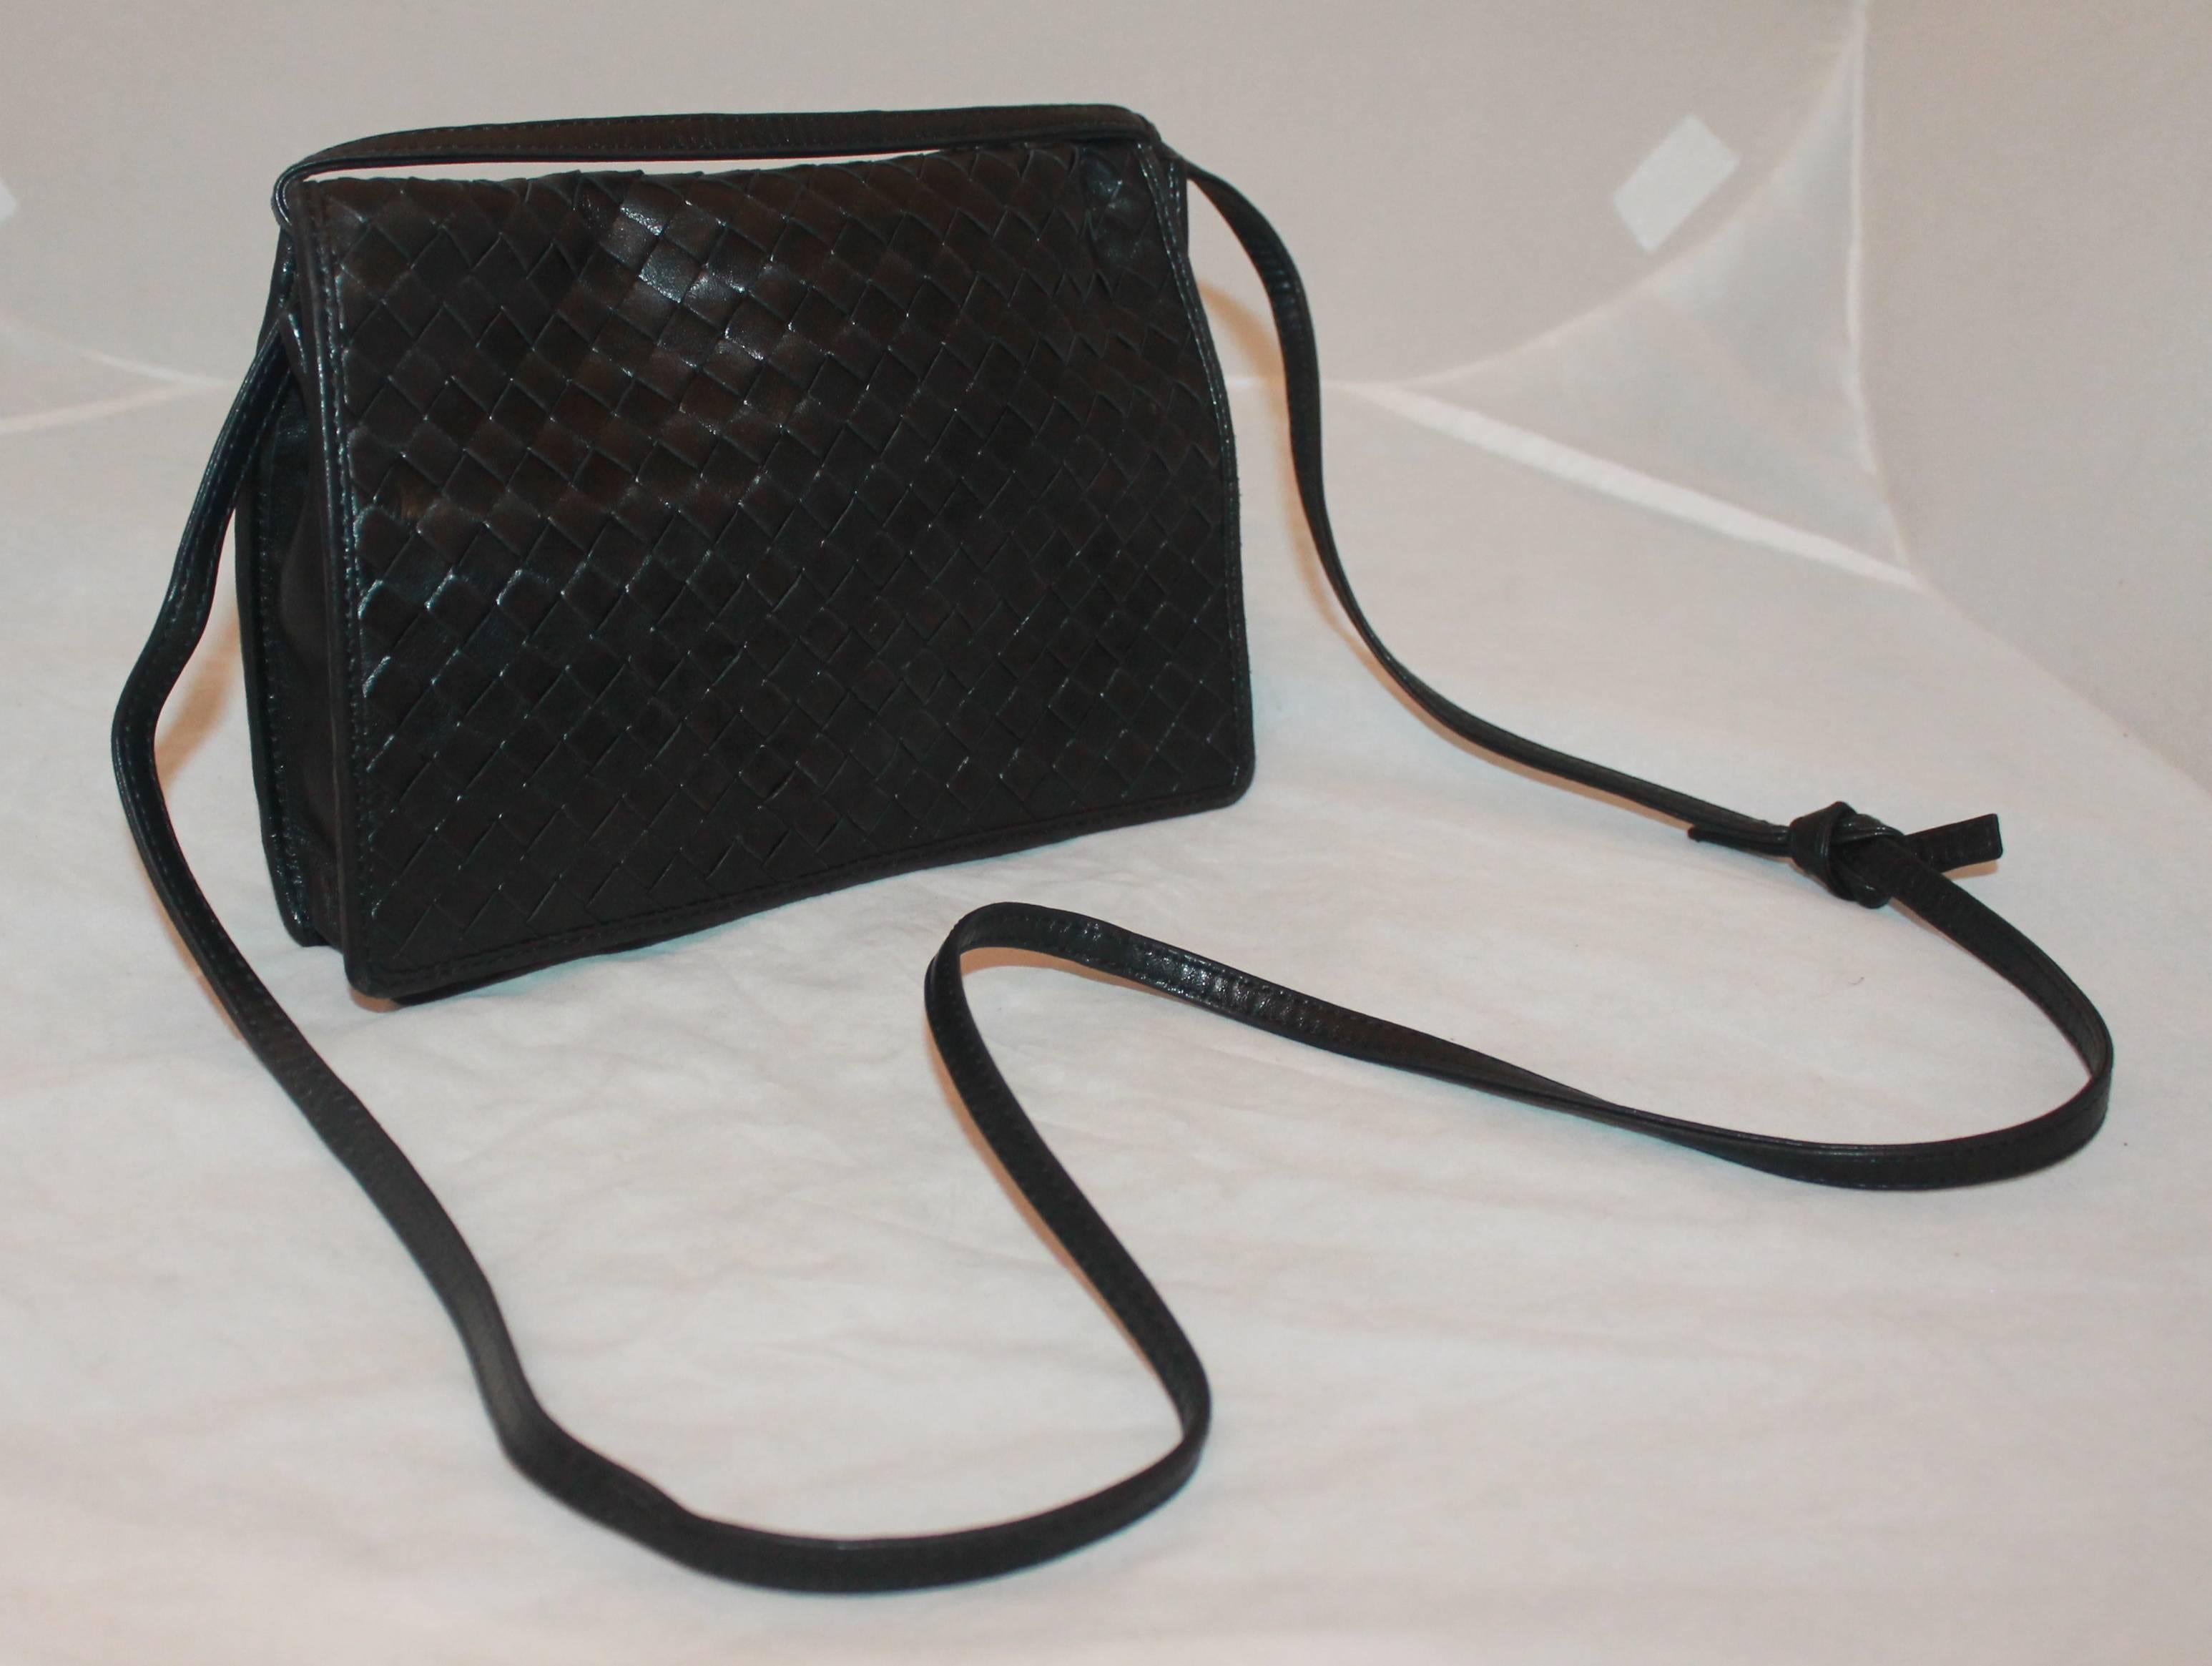 Bottega Veneta Vintage Black Woven Leather Crossbody Bag - circa 80's. This bag is in excellent vintage condition and has an adjustable strap that allows it to be a shoulder bag or crossbody. The is some wear on the inside flap of the bag shown in